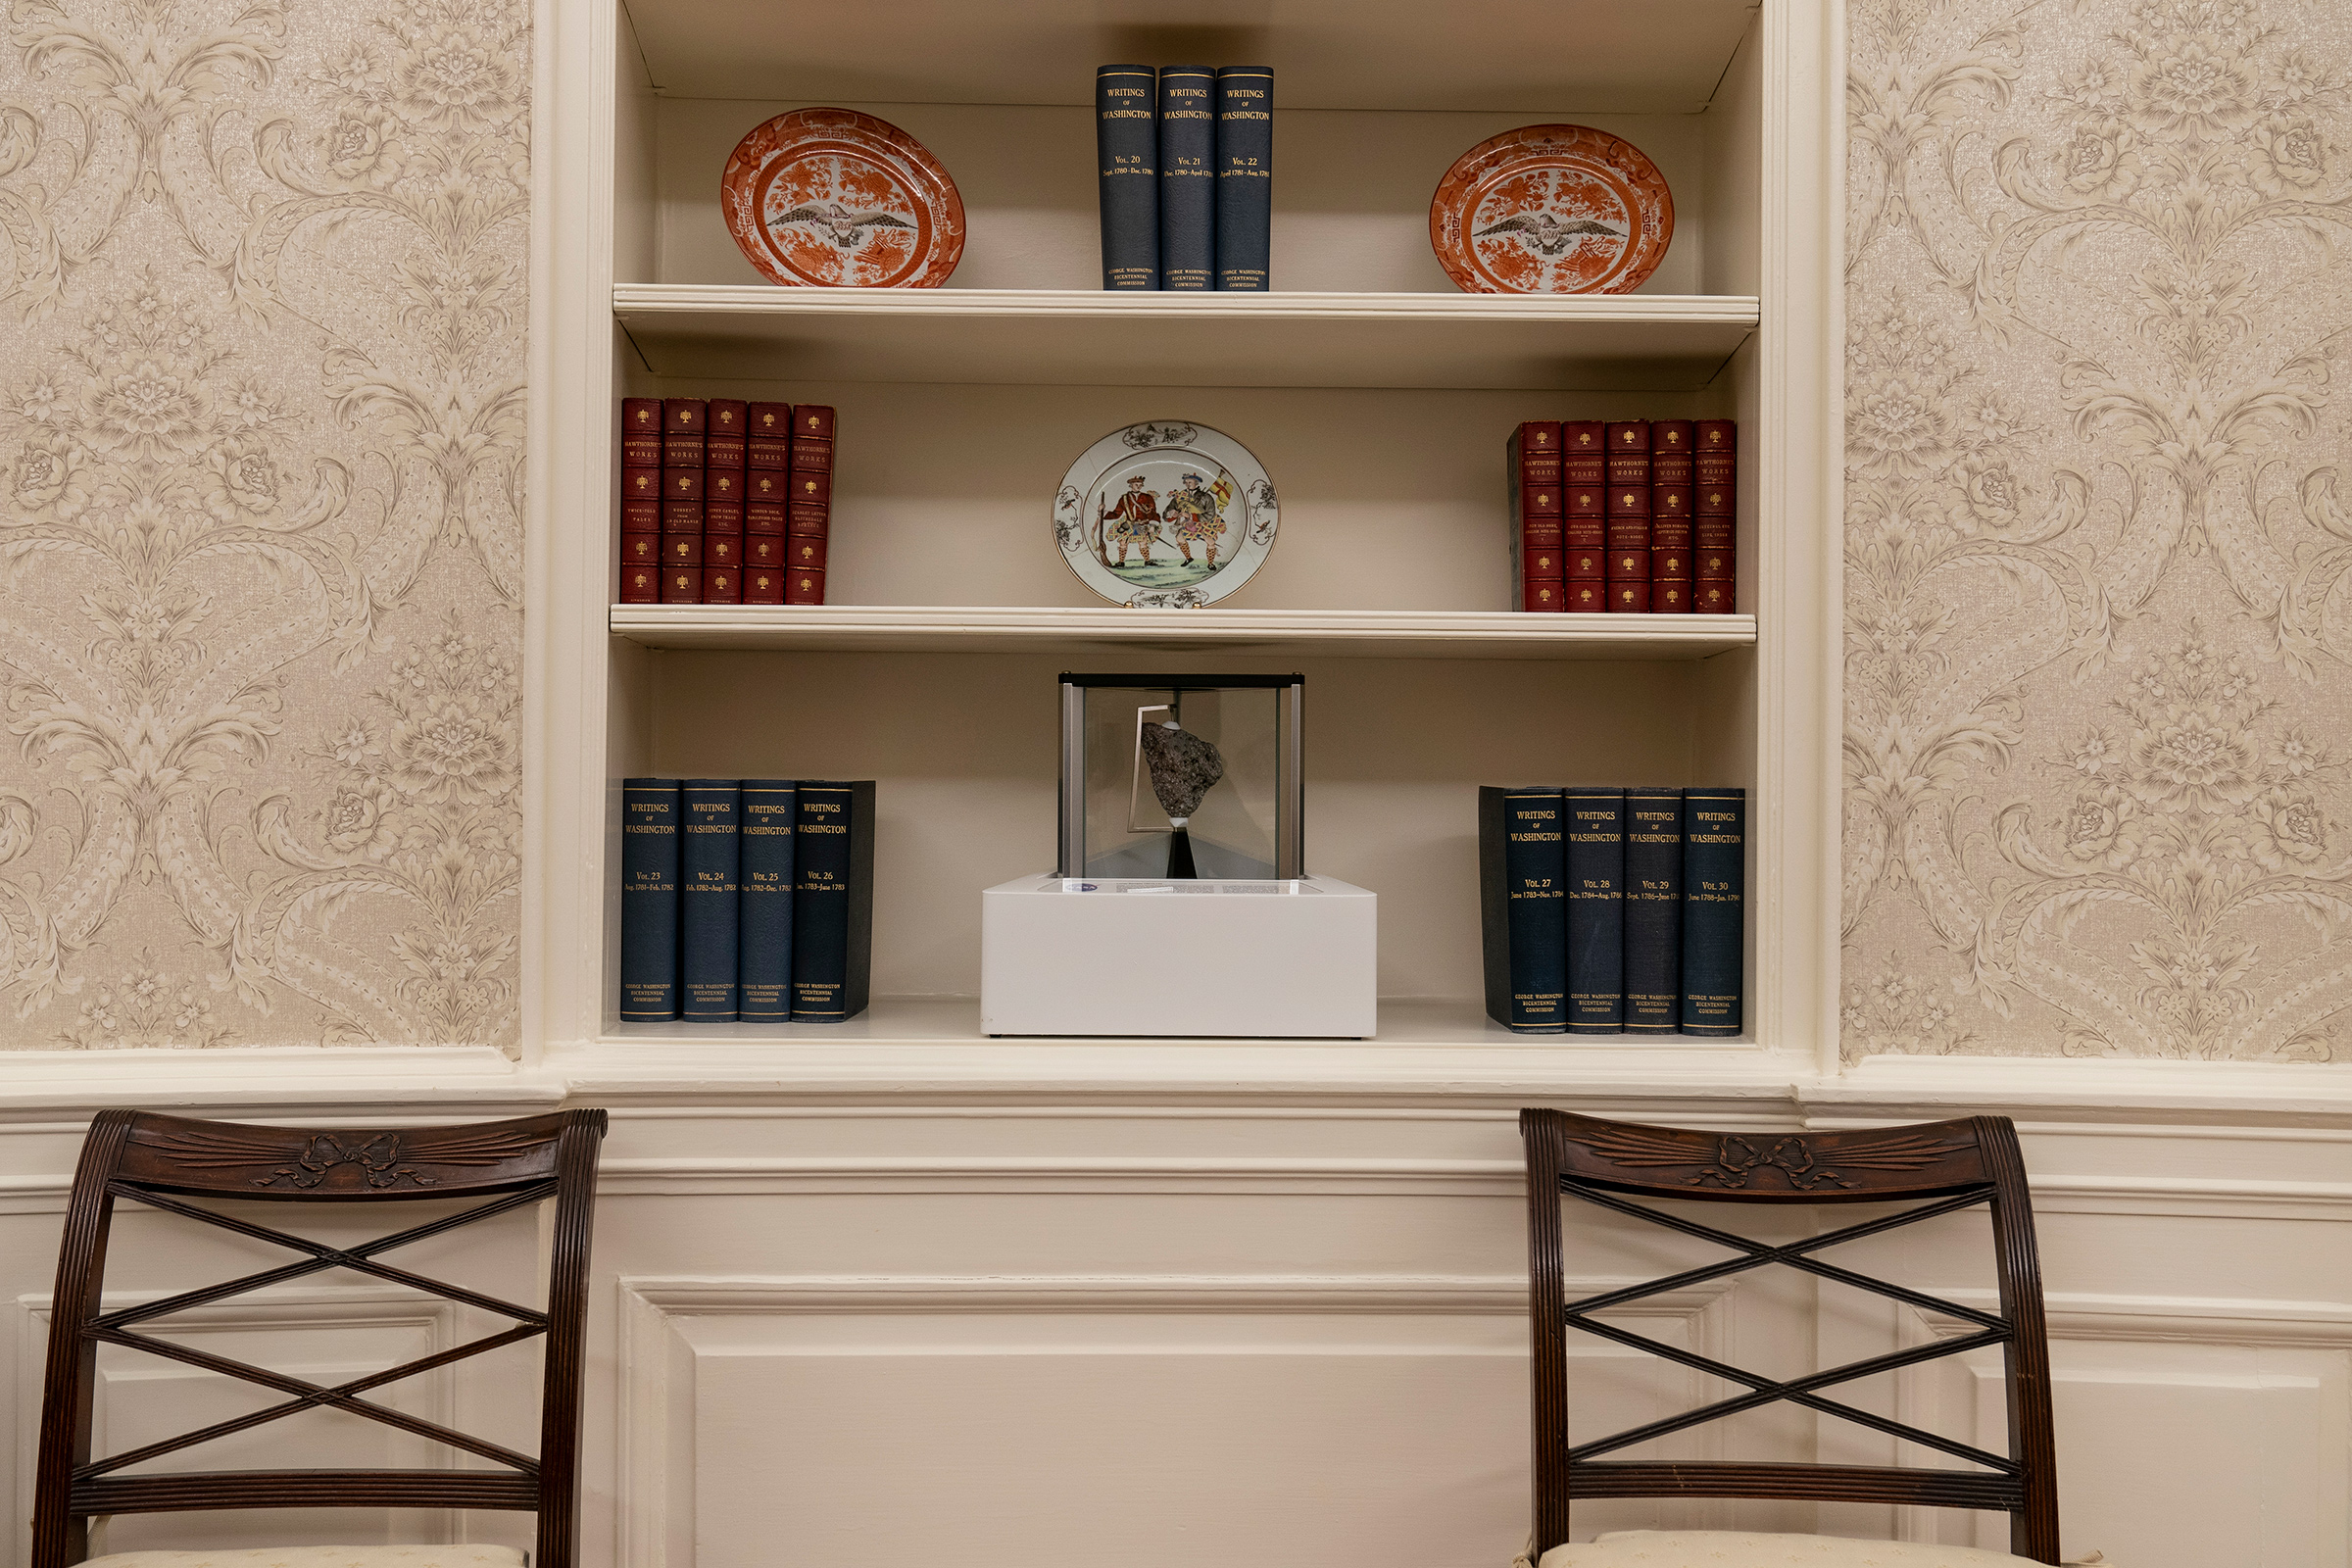 President Joe Biden's redecoration of the Oval Office of the White House includes a rock from the moon, shown here on the bottom shelf on Jan. 20, 2021.